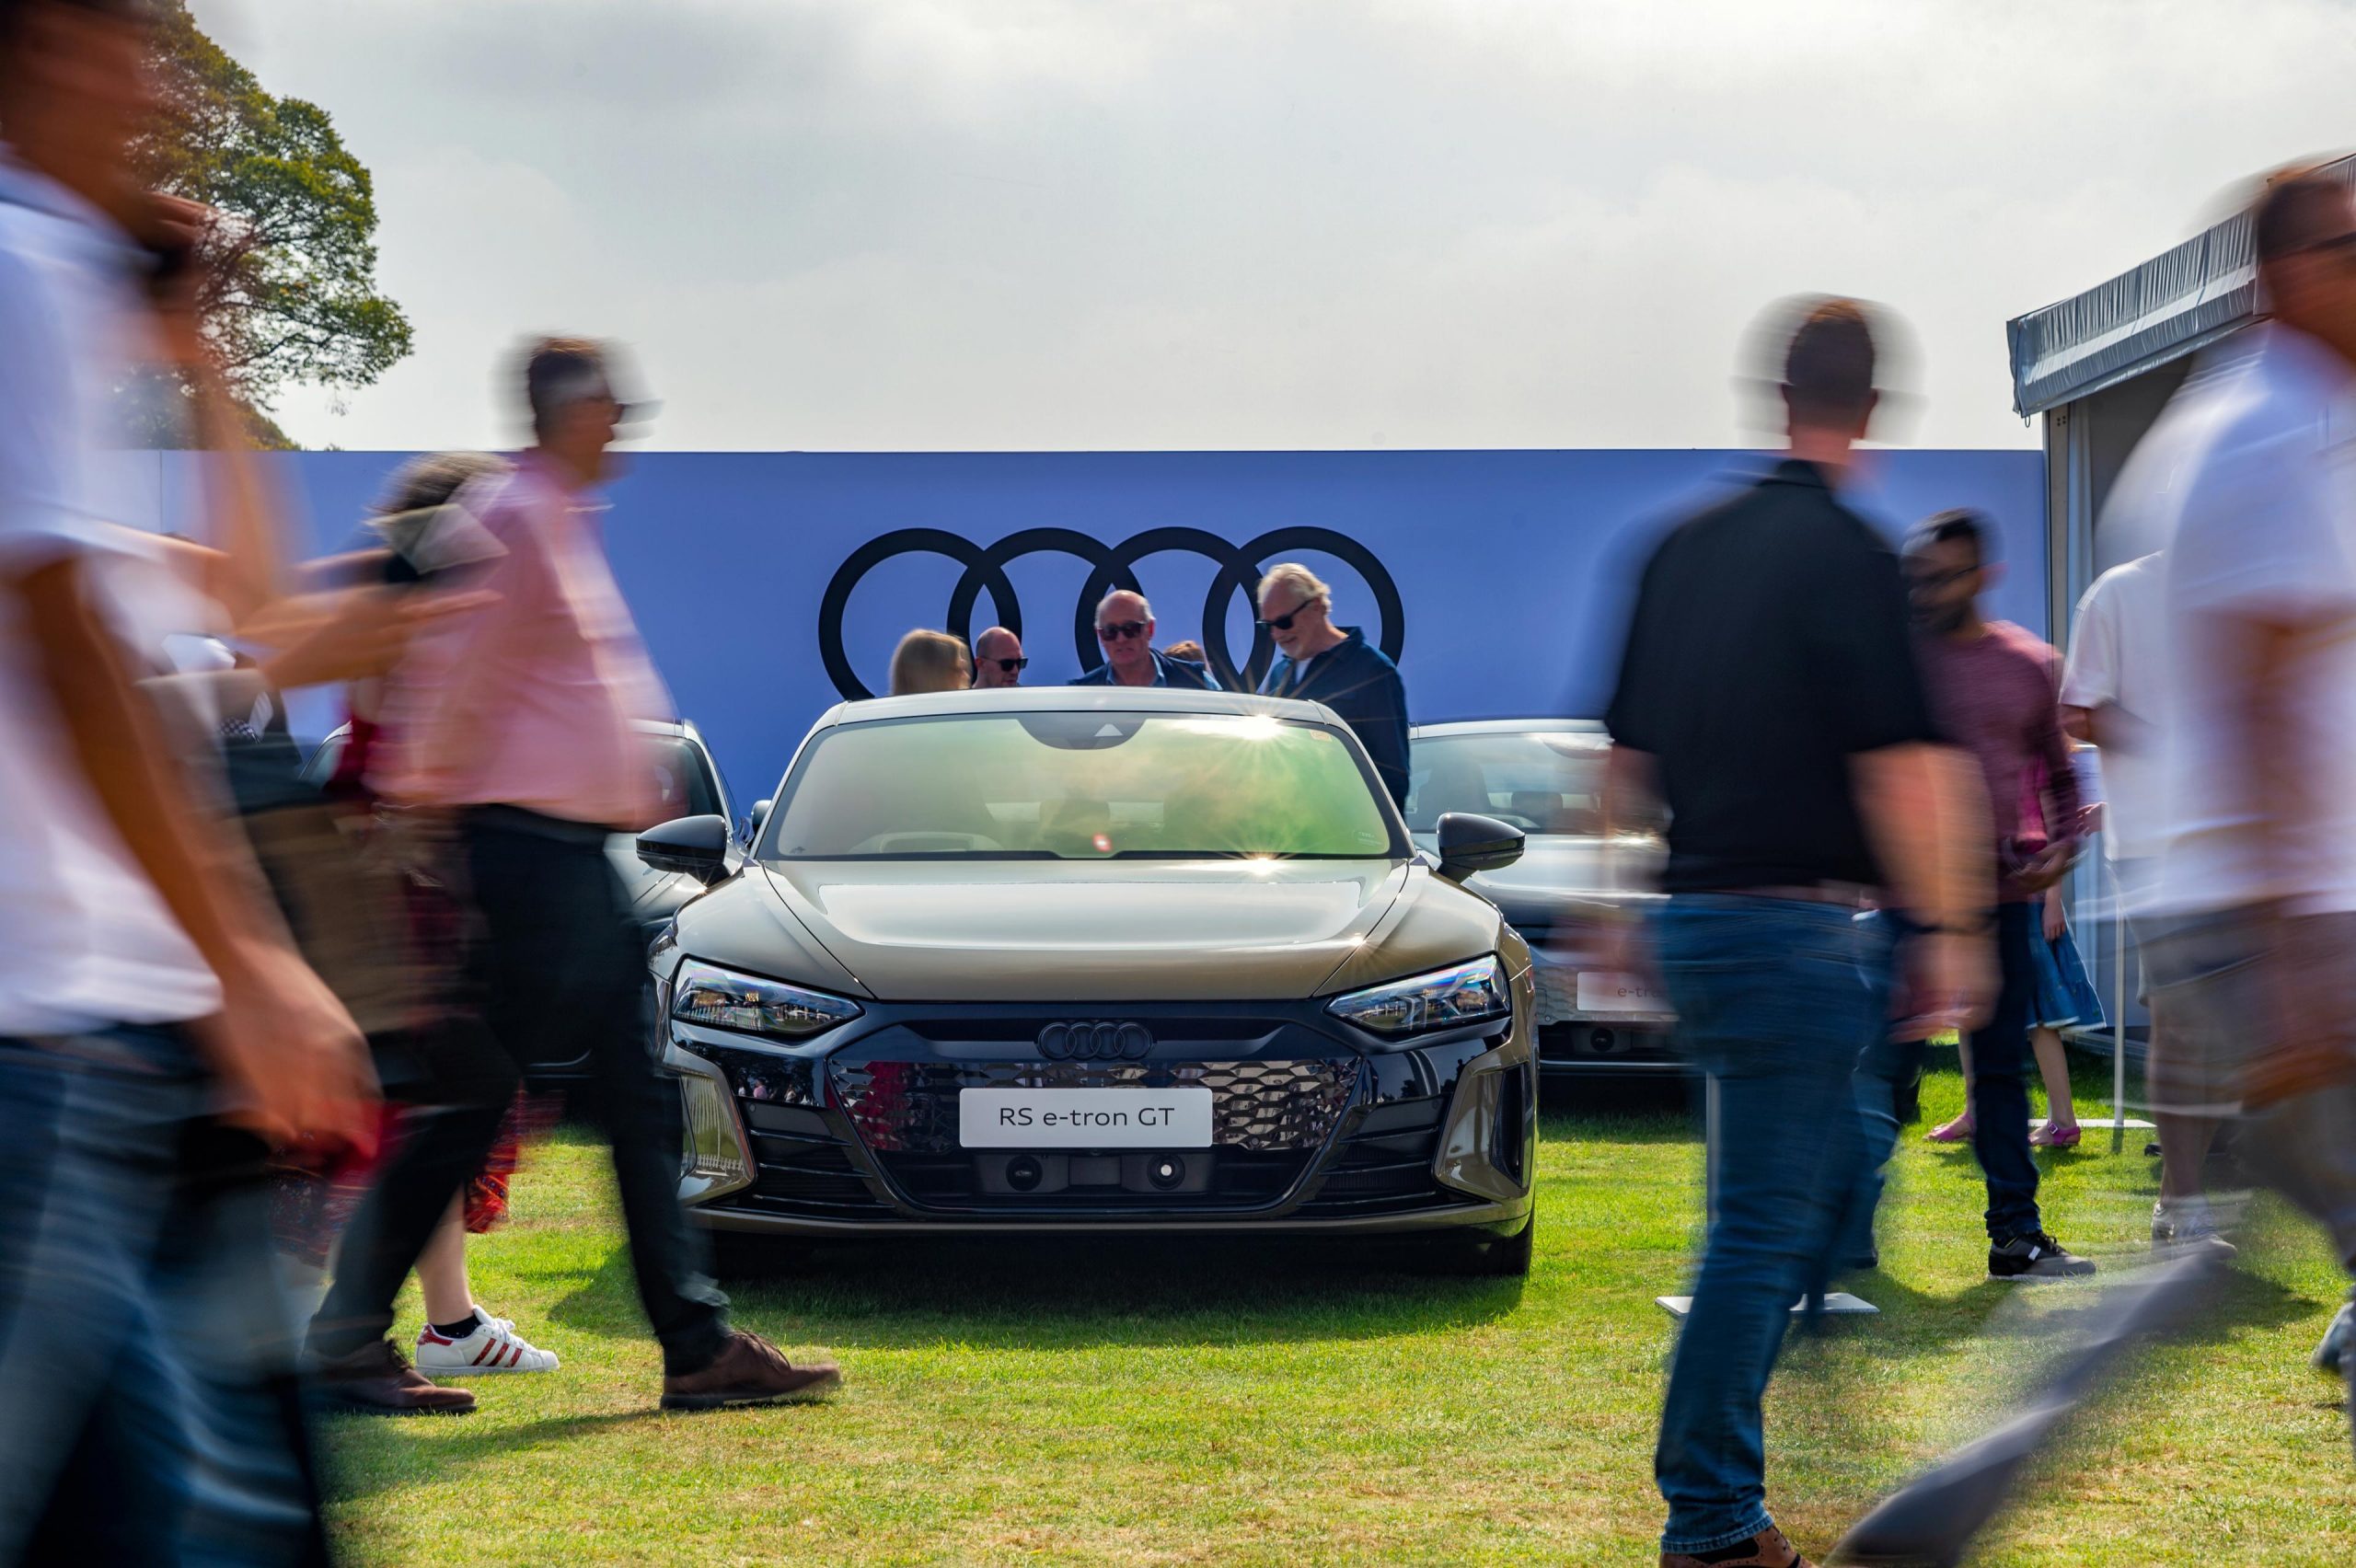 A slow shutter speed image captures the bustling movement of people at a car/automotive event in London. The focus is on a black Audi sports car displayed on an Audi stand, with the Audi logo prominently visible in the background.